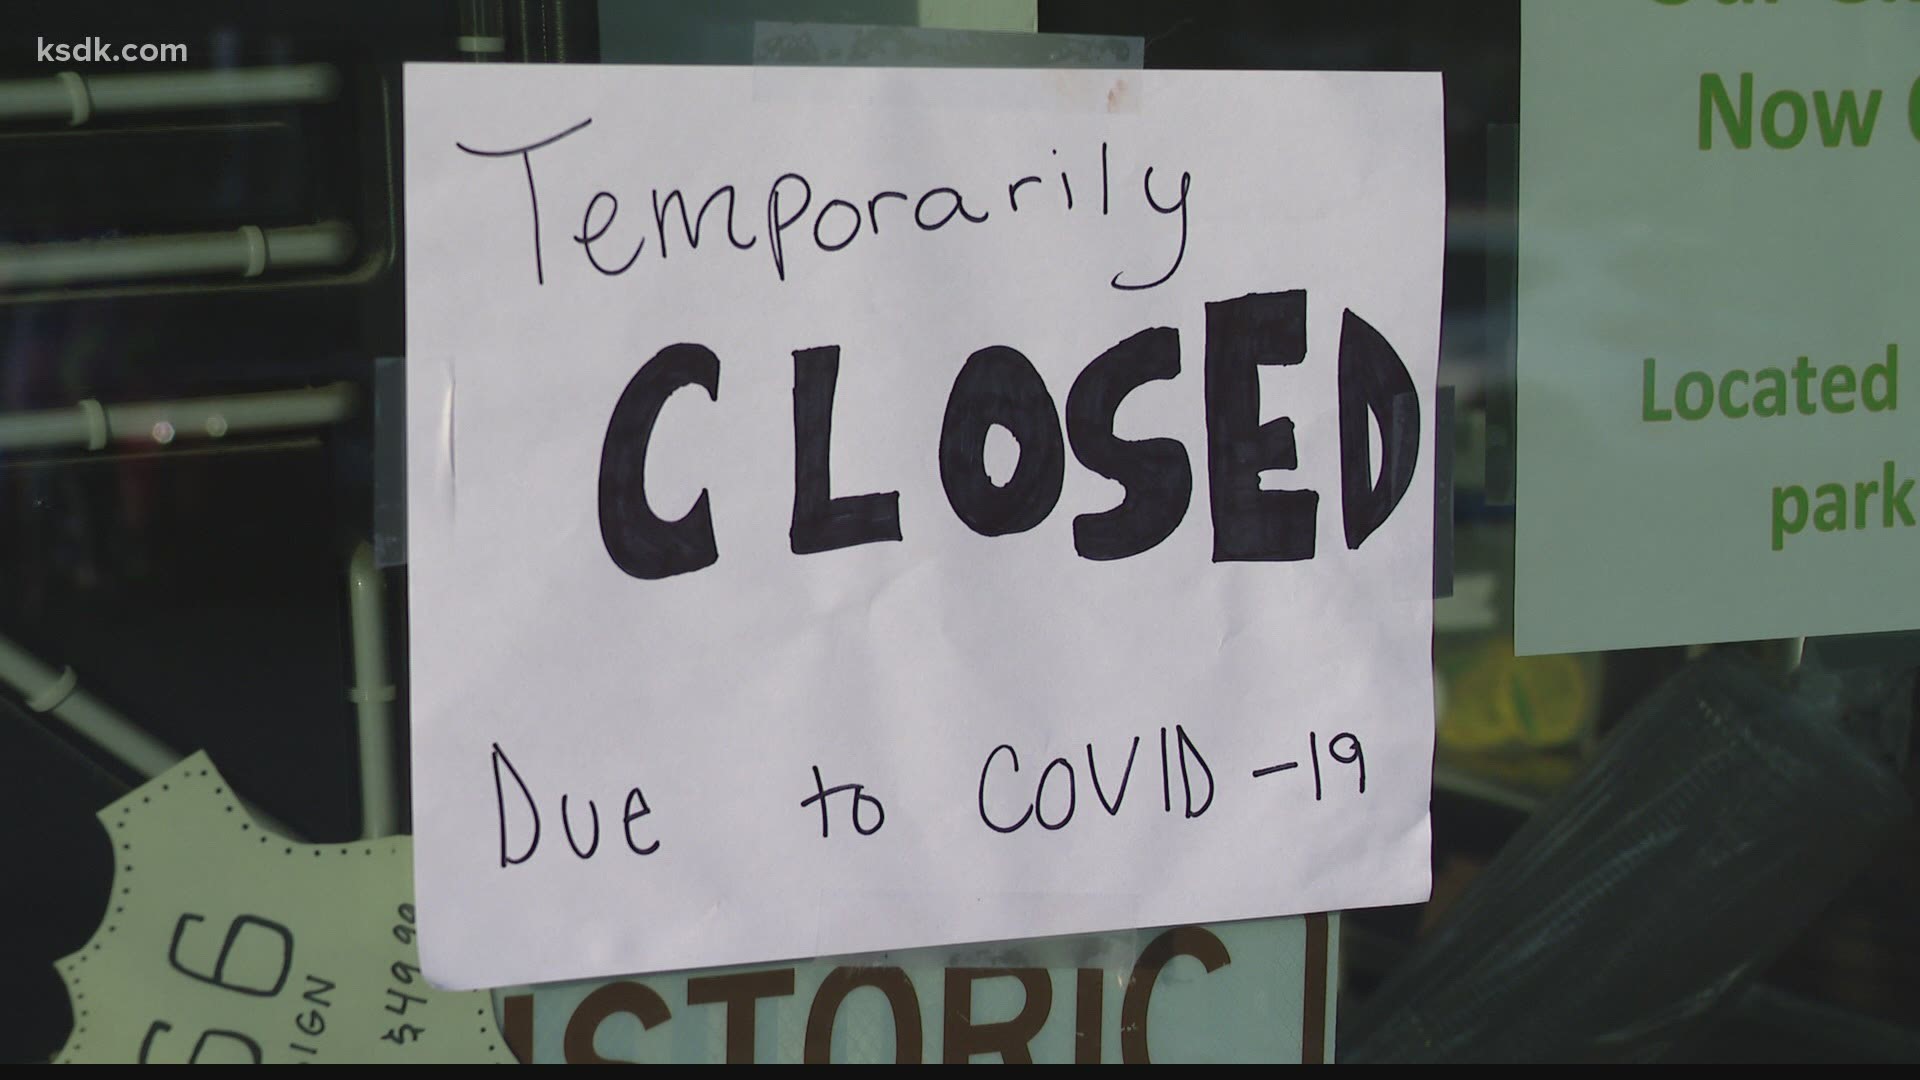 Some restaurants have had an employee or customer who has tested positive for COVID-19. Others are closing out of an abundance of caution due to the spike in cases